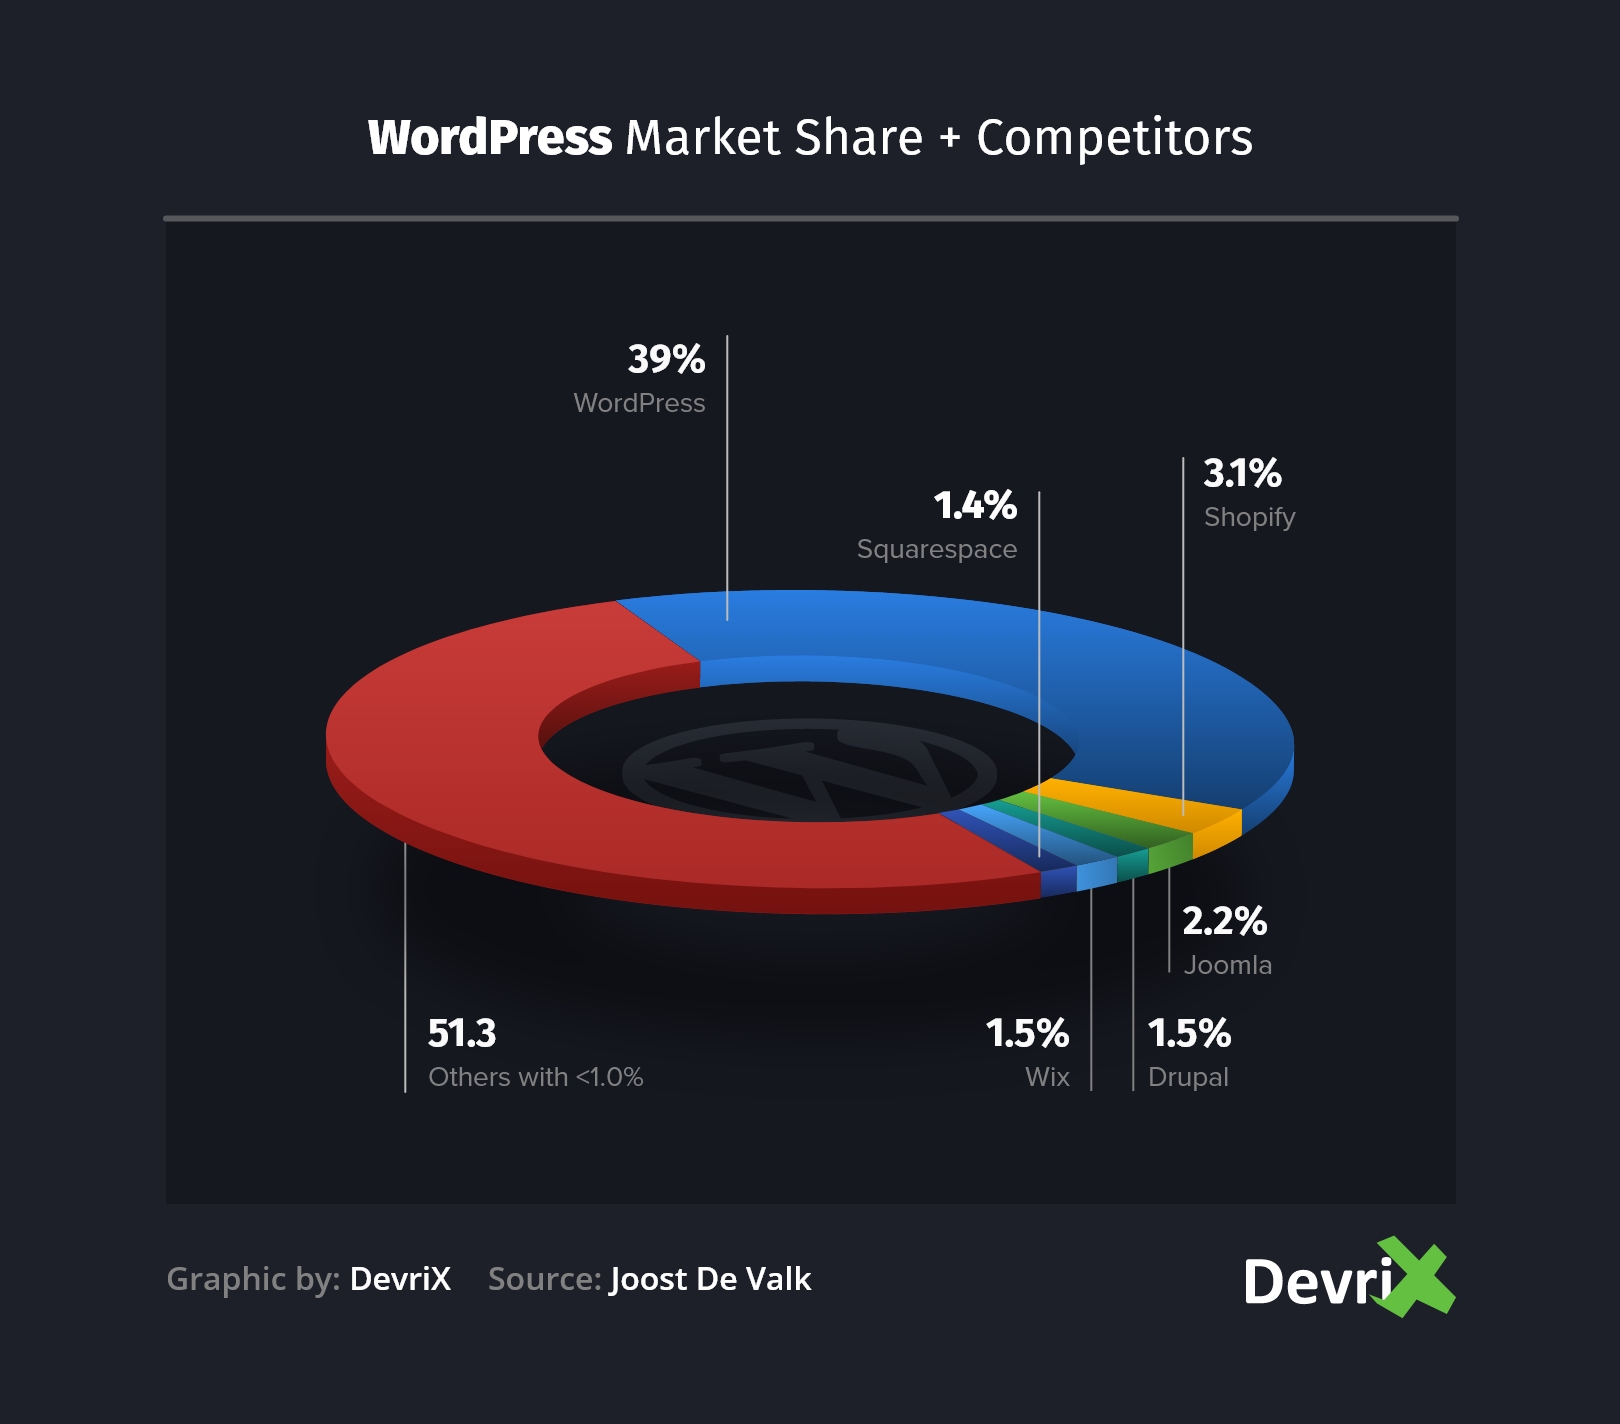 WordPress market share and competitors graphic